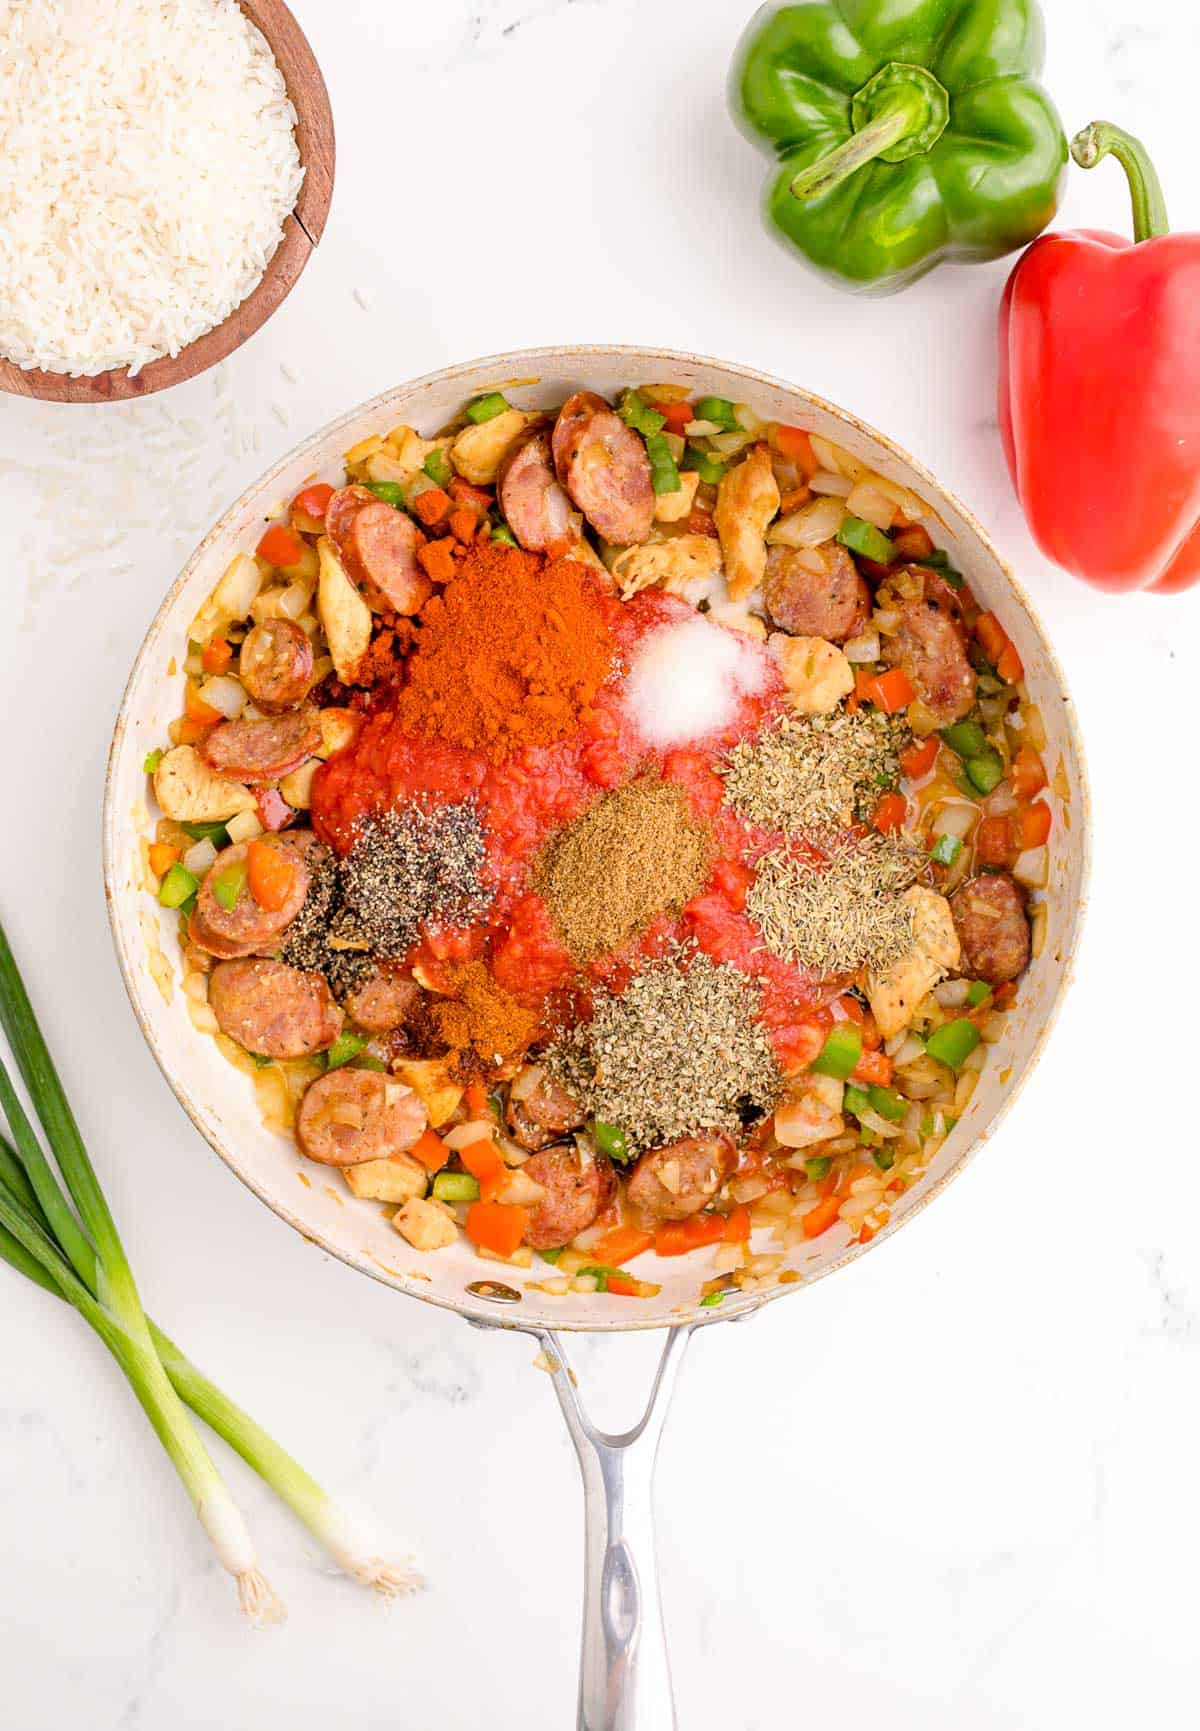 seasonings added to the skillet with chicken, vegetables, and sausage